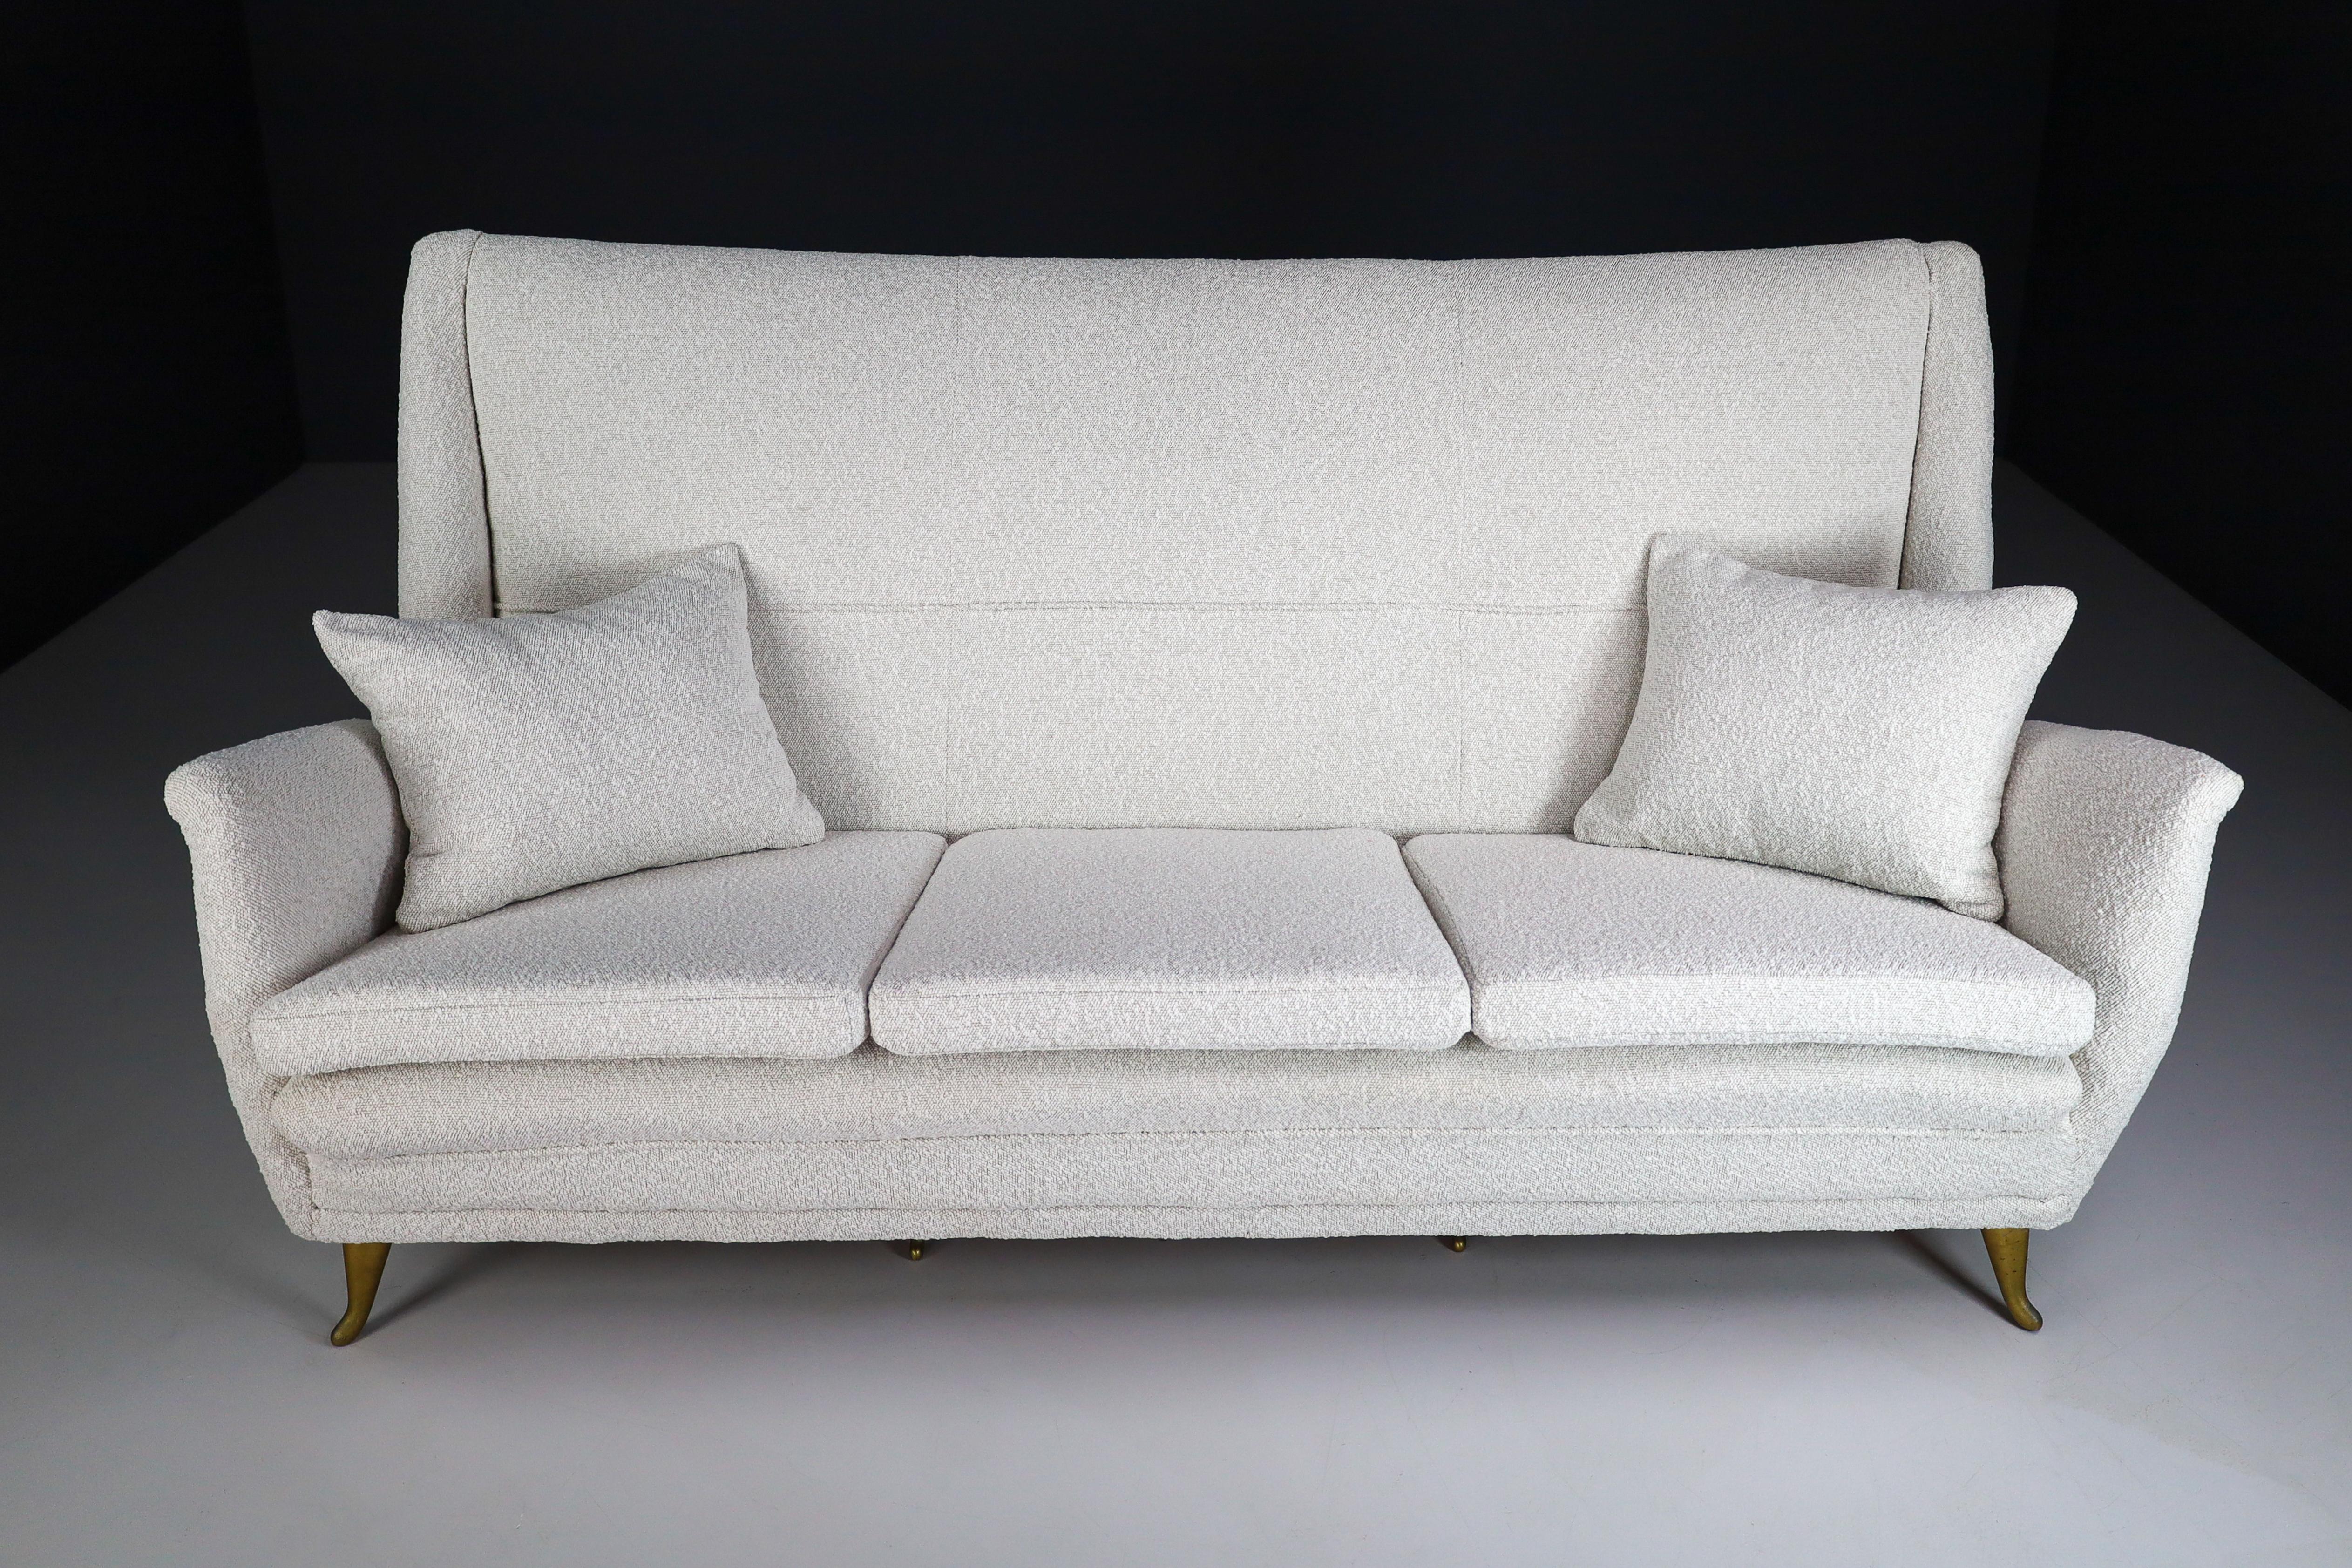 Elegant three seat high back sofa reupholstered in new bouclé fabric was designed by Gio Ponti and produced by the ISA company in Bergamo, Italy 1950s. ISA Bergamo was responsible for manufacturing a number of striking designs by Gio Ponti in the